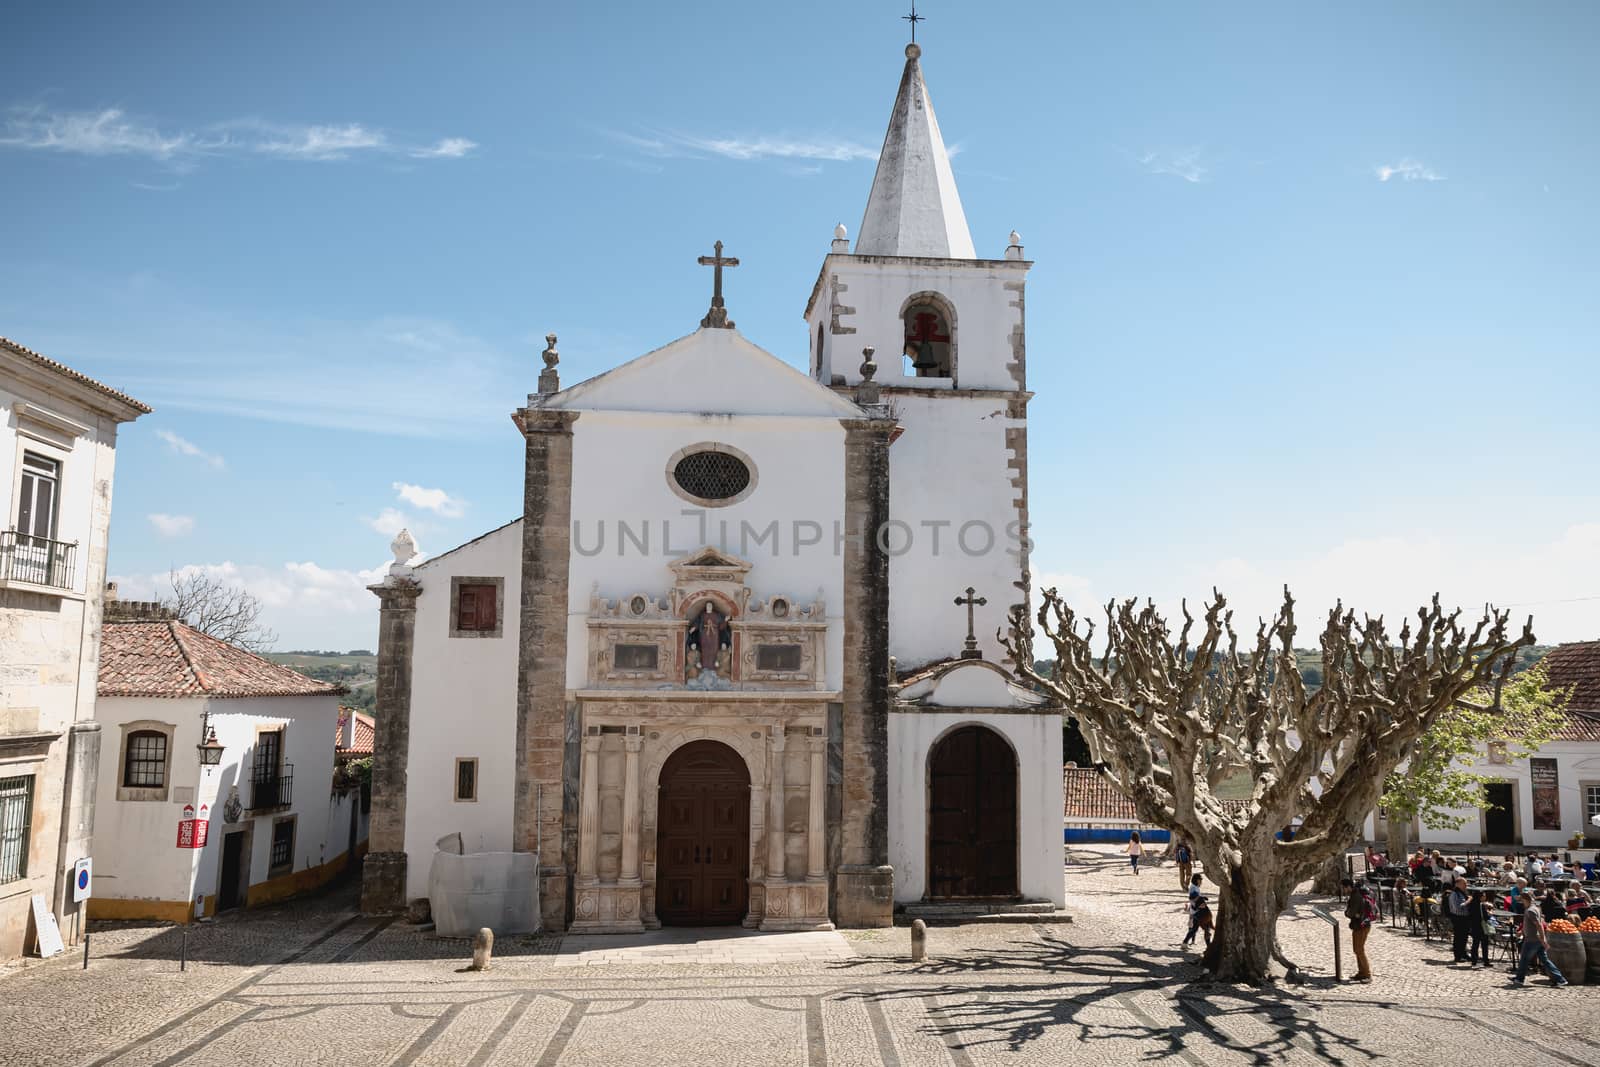 Obidos, Portugal - April 12, 2019: people walking around the Church of Saint Mary (Santa Maria) on a spring day